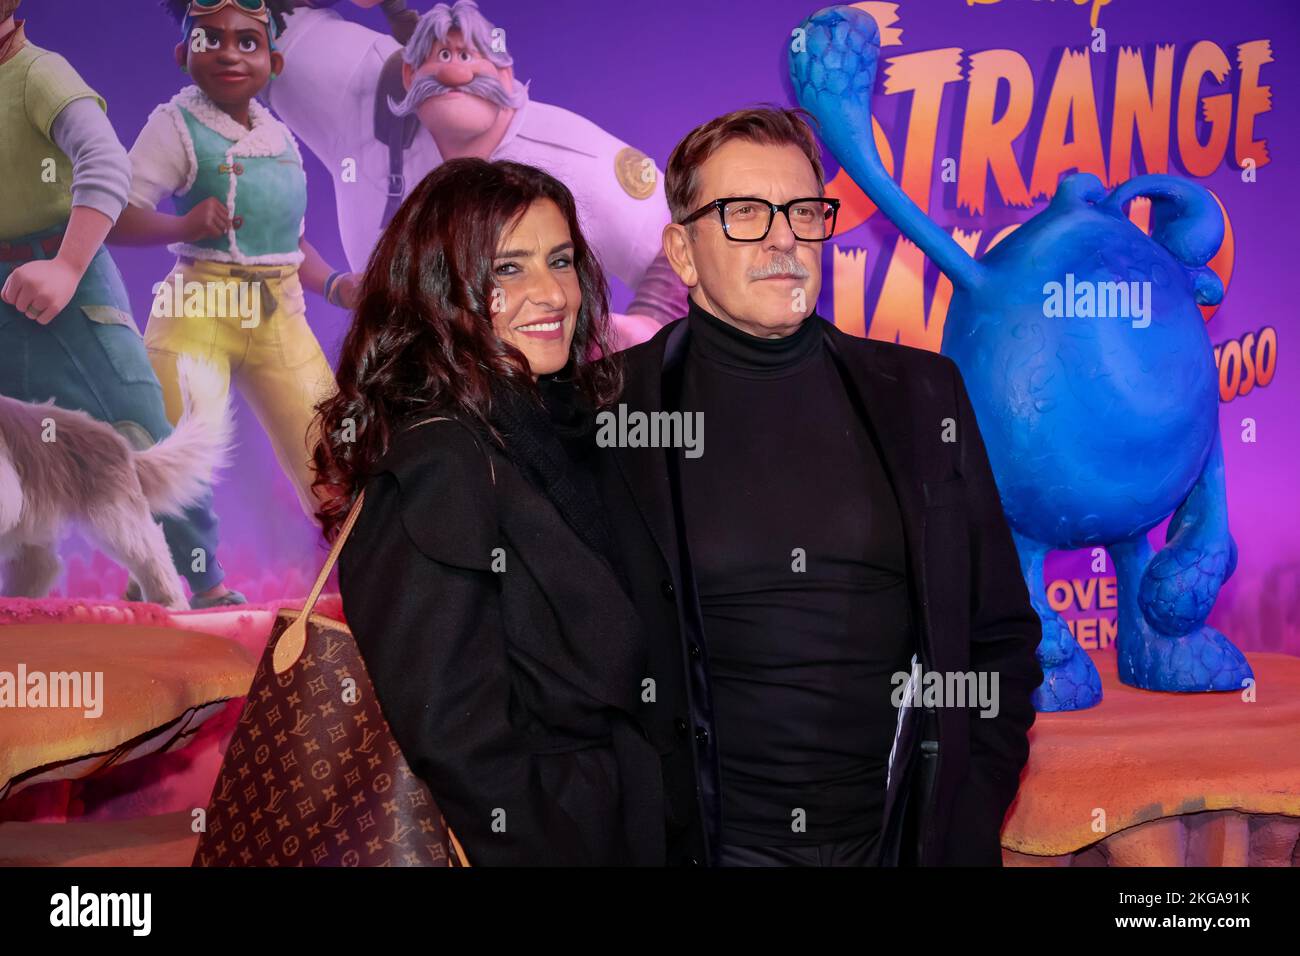 Rome, Italy - 21 Nov 2022: Pietro Genuardi and his wife Linda attend the red carpet of the premiere of the animated film 'Strange World - Un Mondo Misterioso' at The Space Cinema Moderno. Rome, Italy. Stock Photo